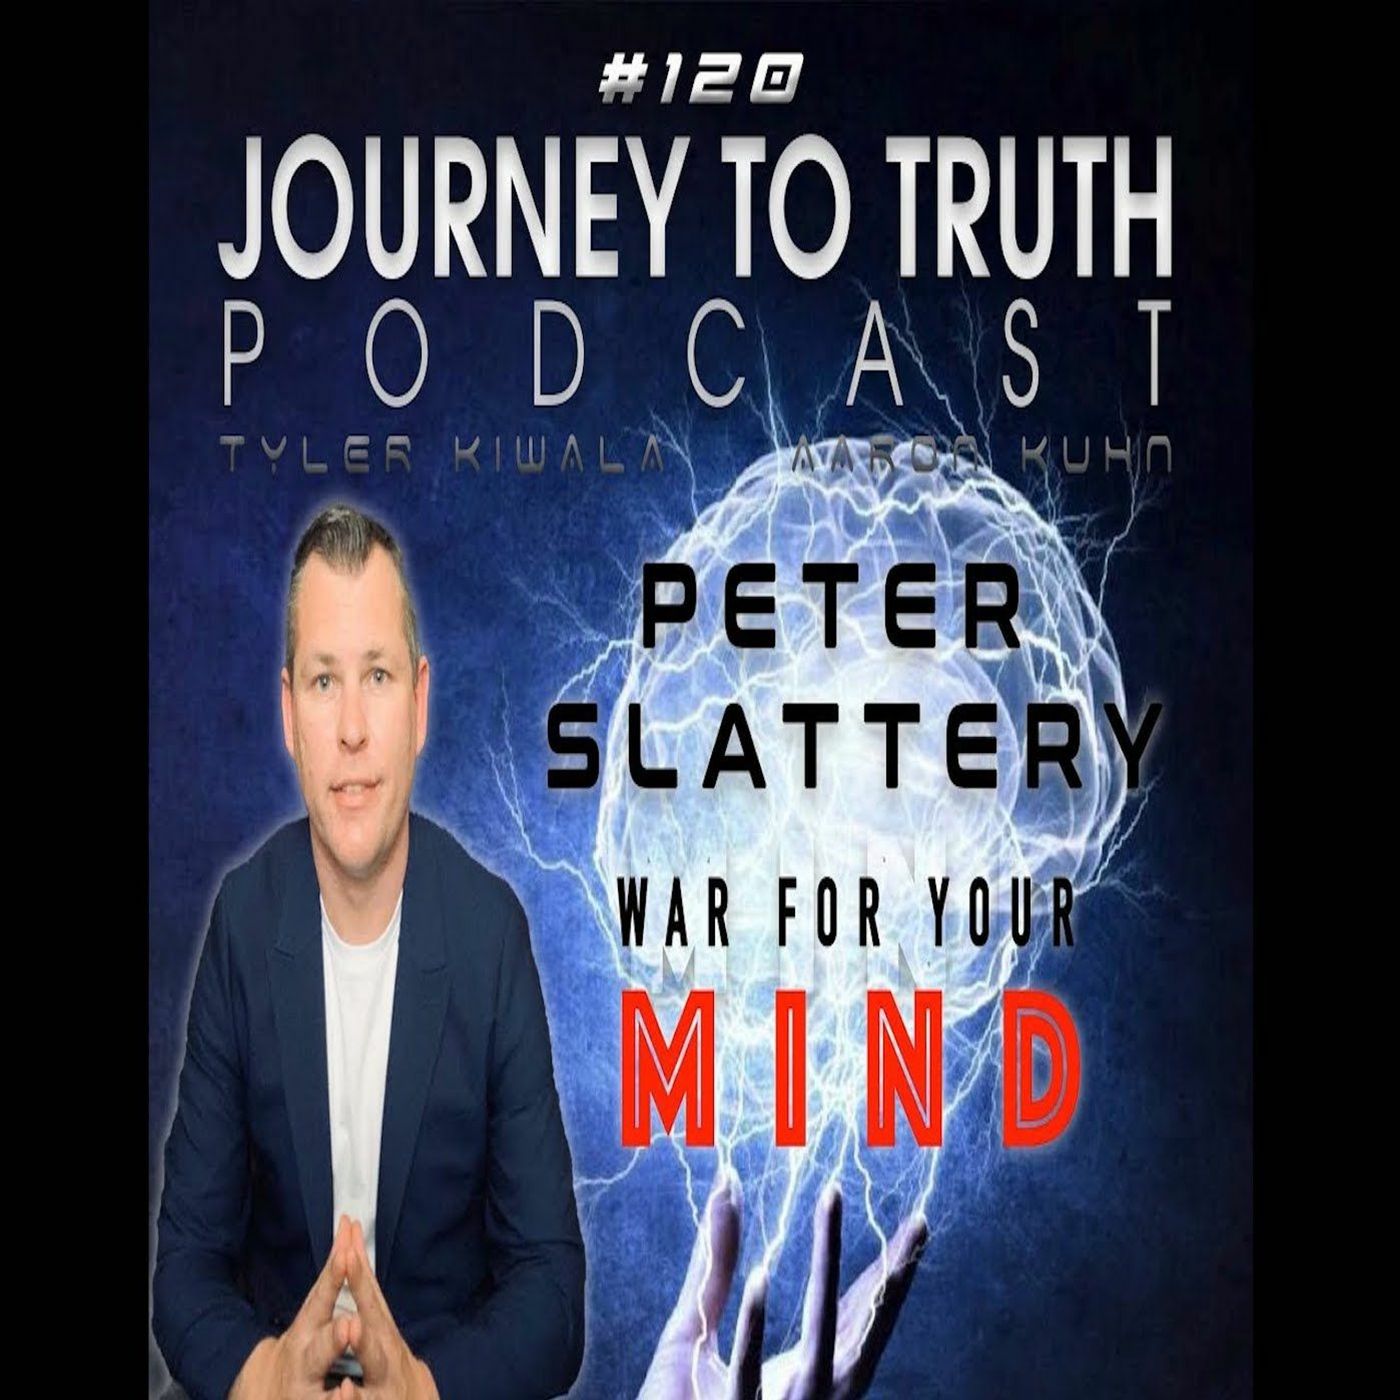 Highlights from Ep. 120 - Peter Slattery - War For Your Mind - A Prison Without Bars (4/15/21)